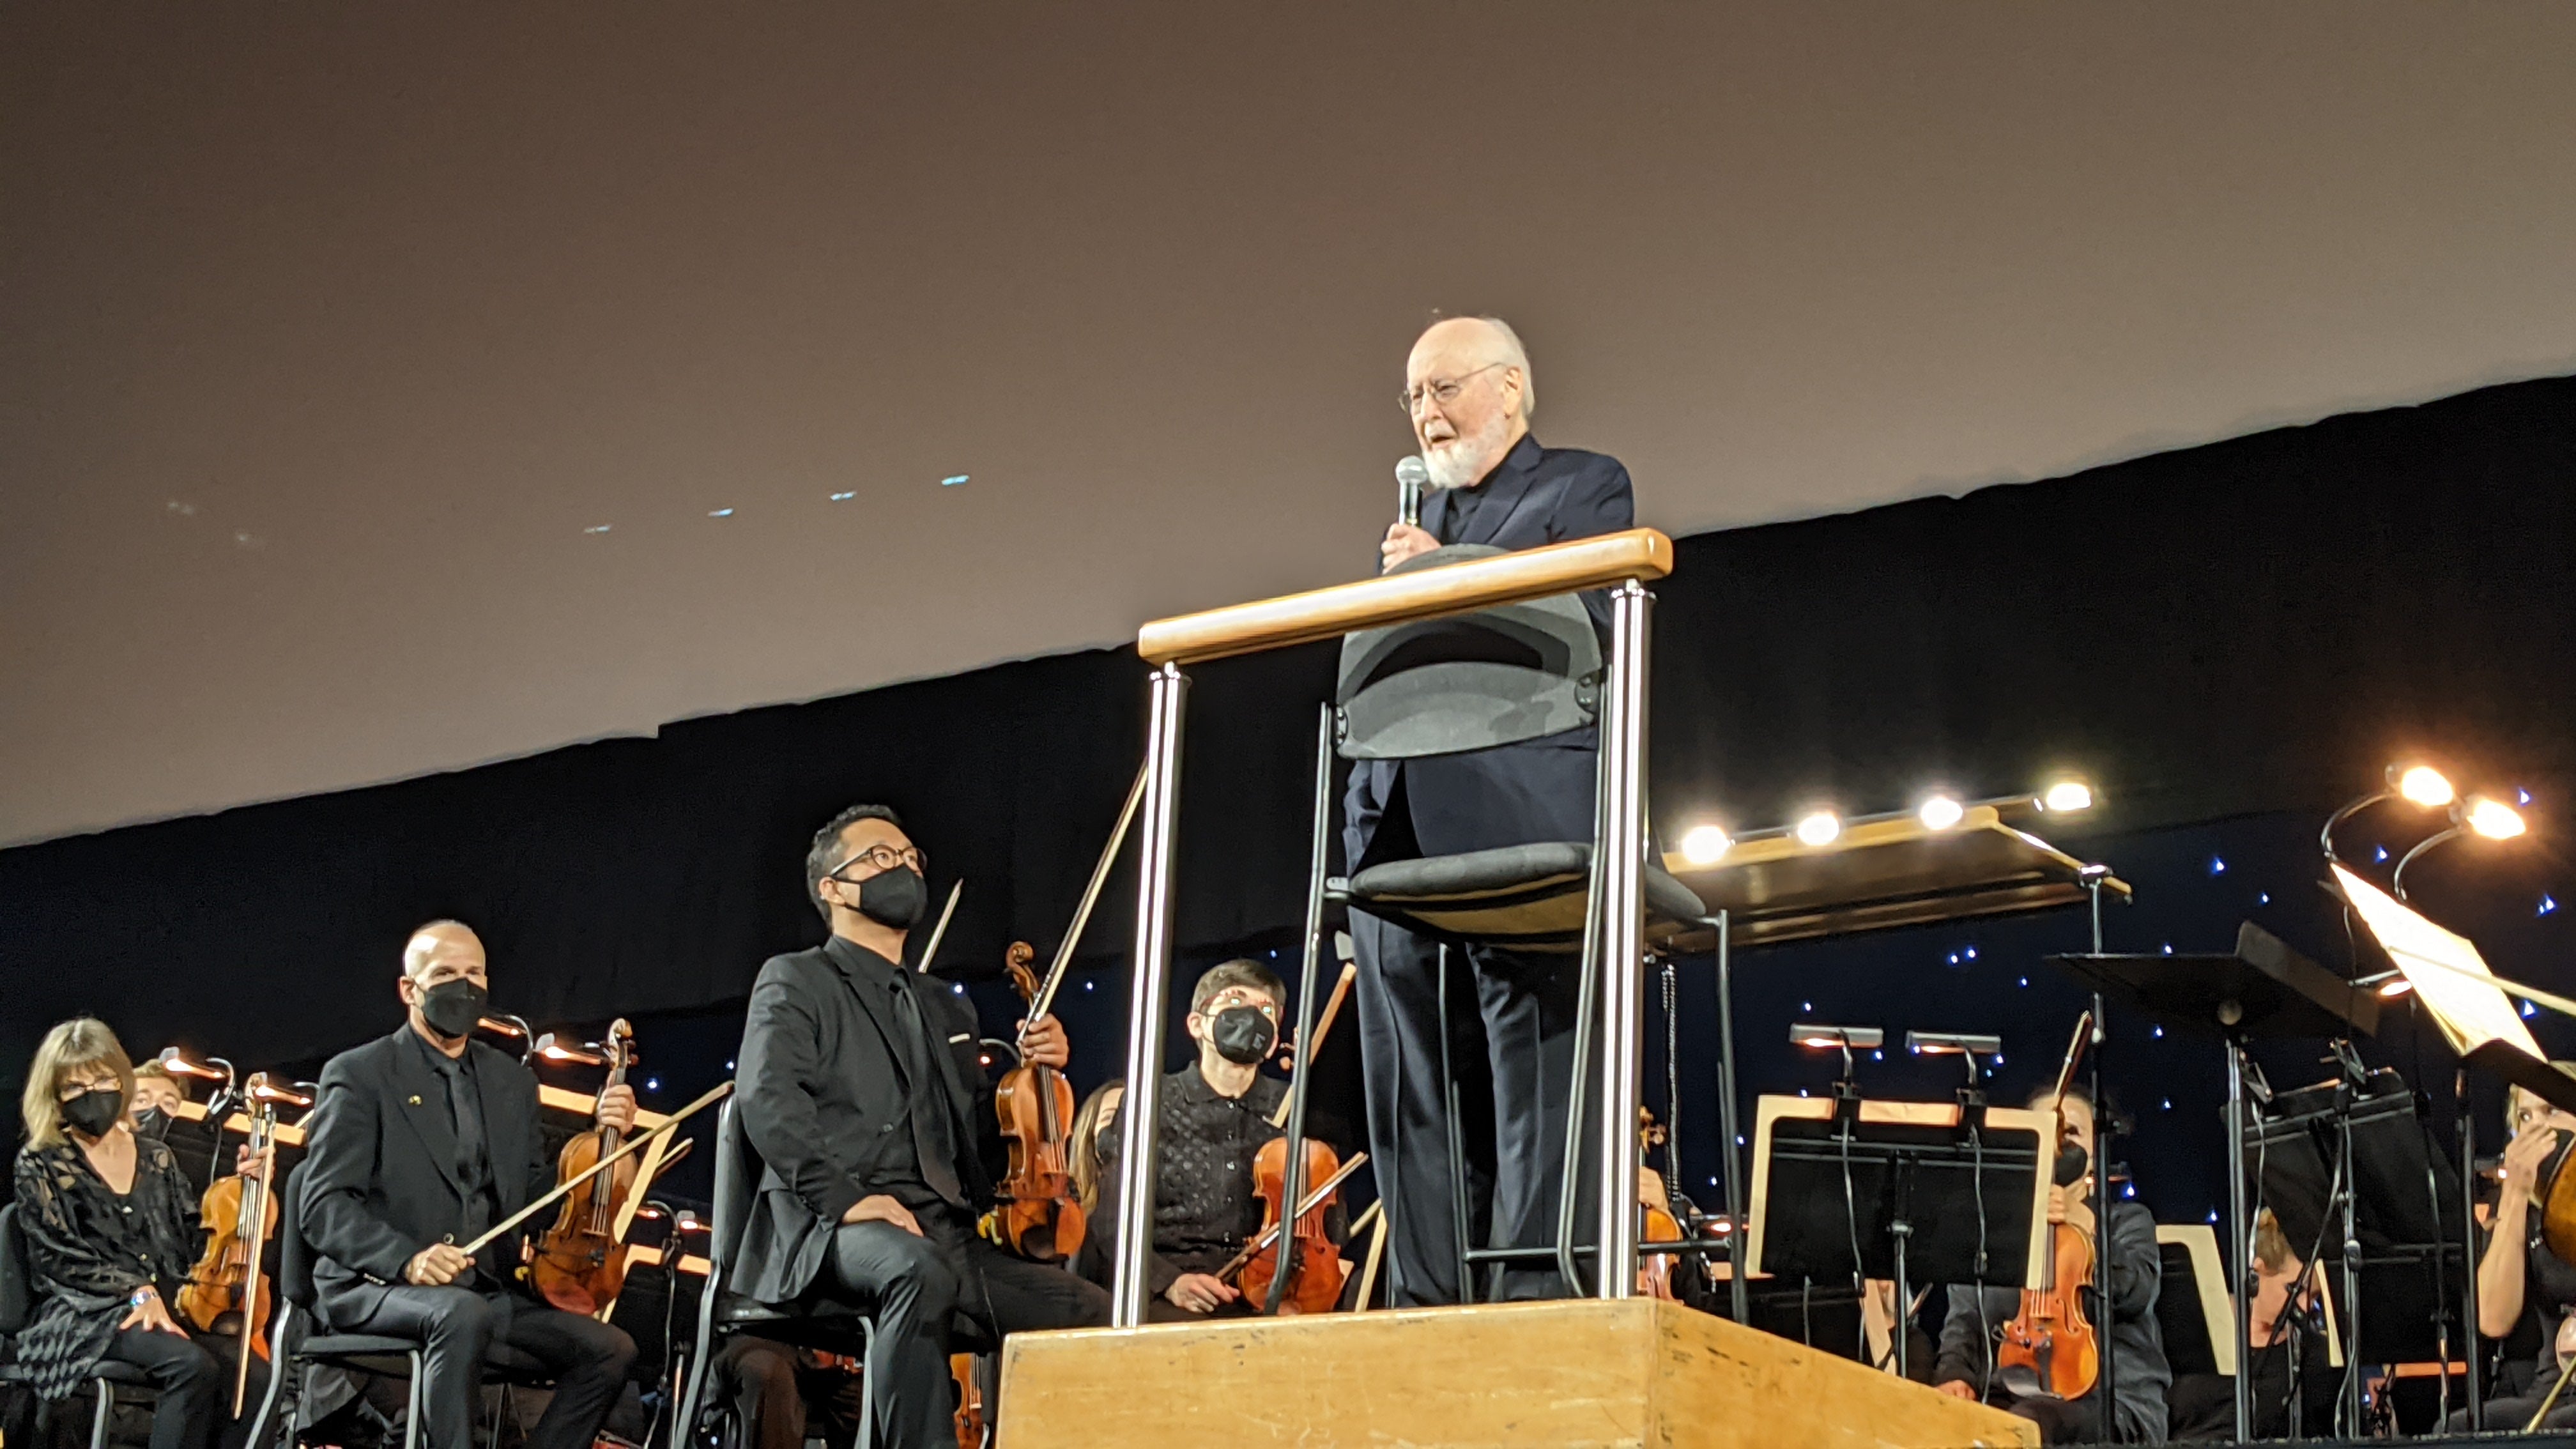 Image for Legendary Star Wars composer John Williams returns to conduct surprise orchestra performance at Star Wars Celebration